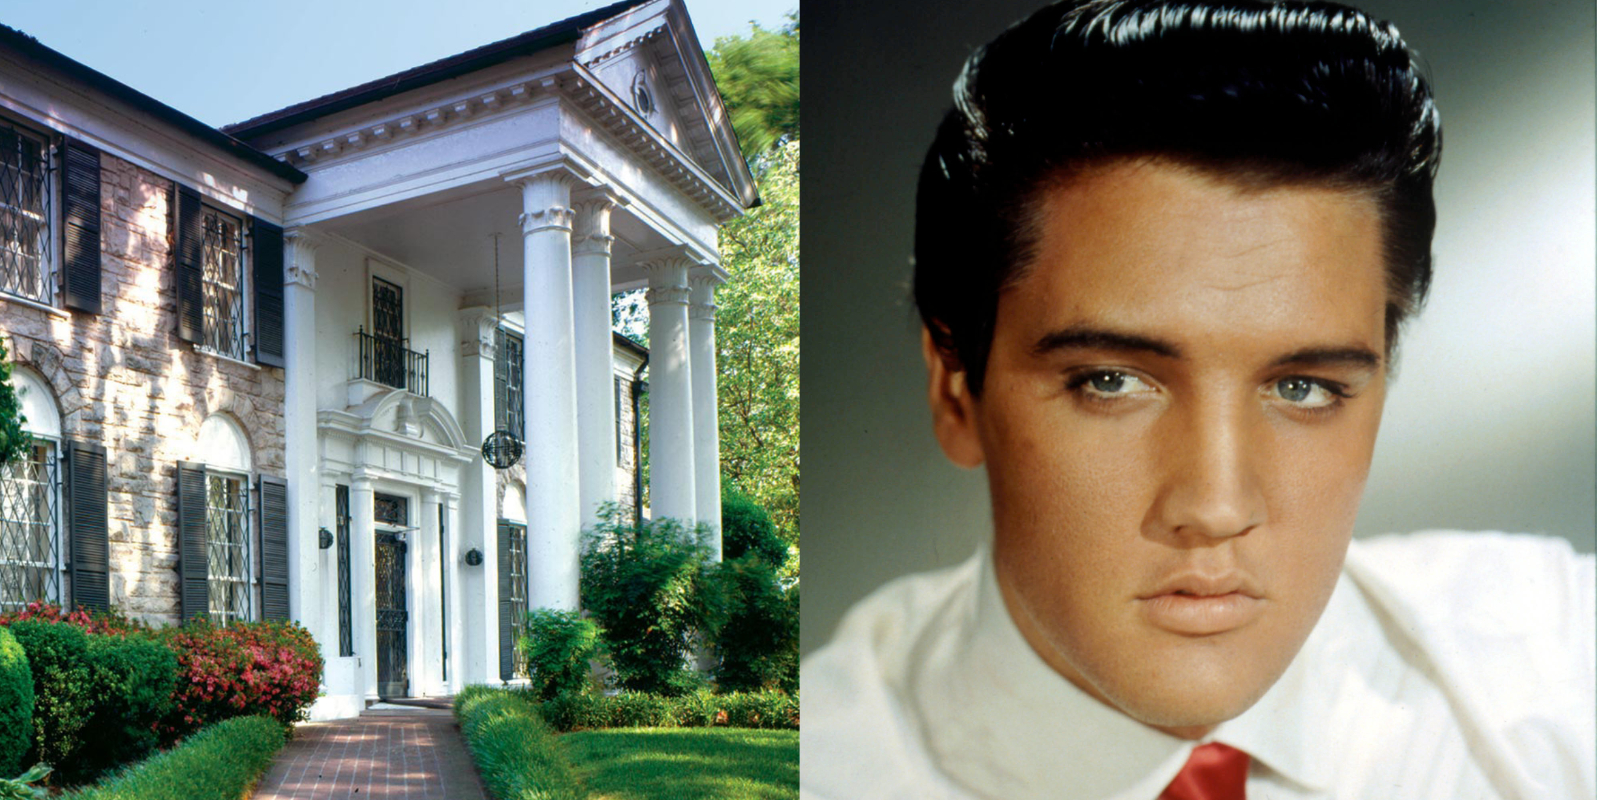 You are currently viewing Graceland’s Most Popular Room Has a Secret Window Used for Entertaining Elvis Presley and his Friends